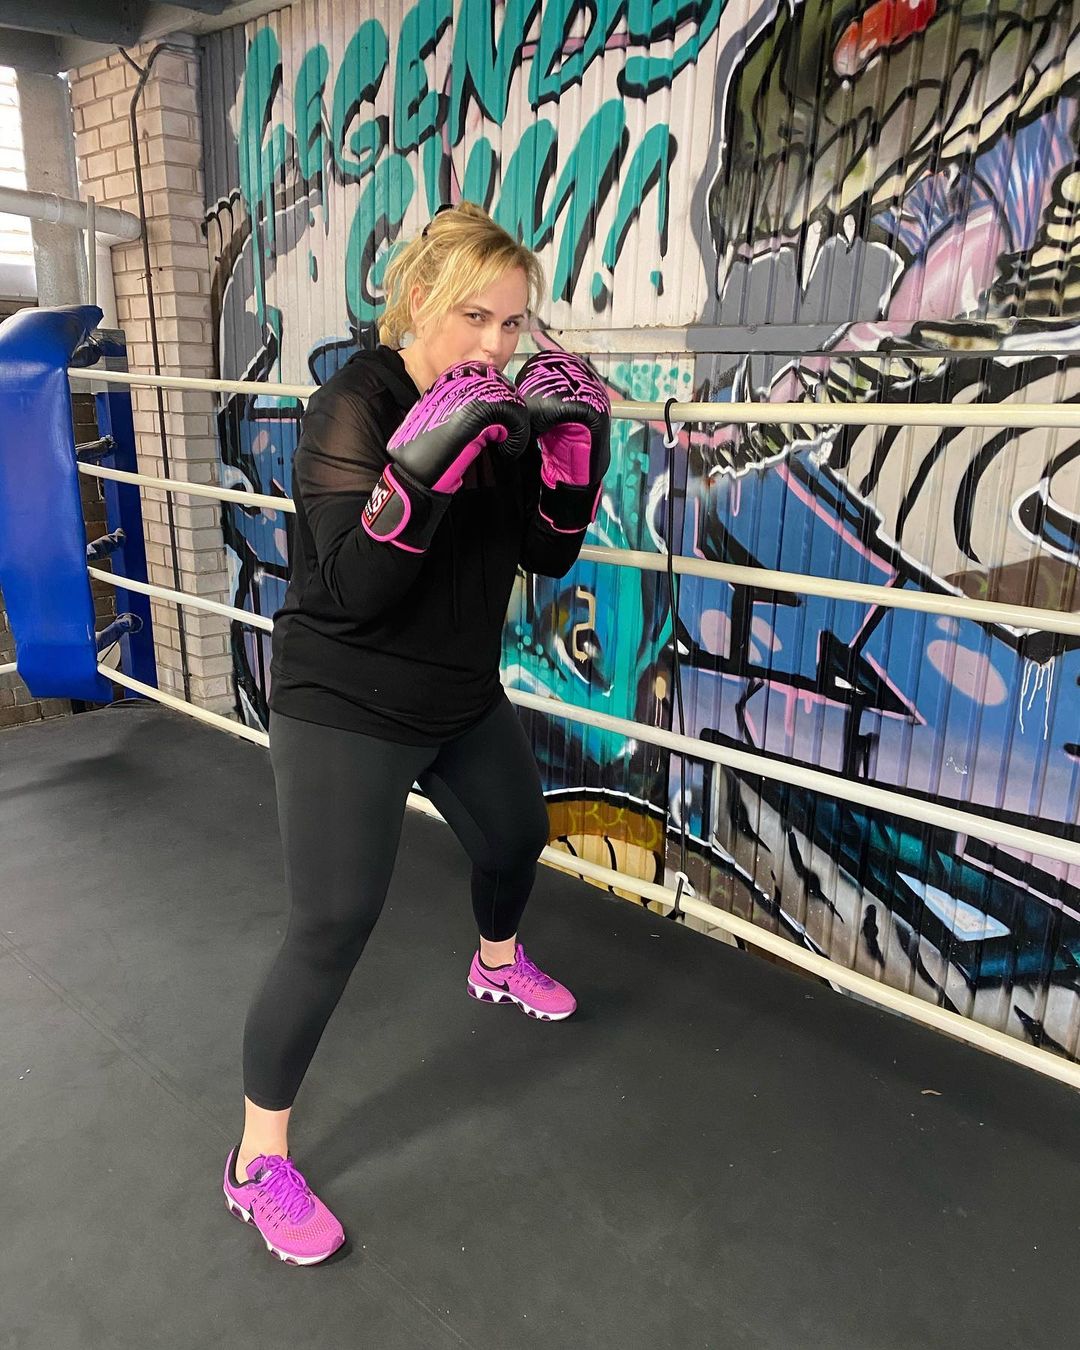 Rebel Wilson shown in a black top and black pants paired with pink sneakers with boxing gloves on her hands.